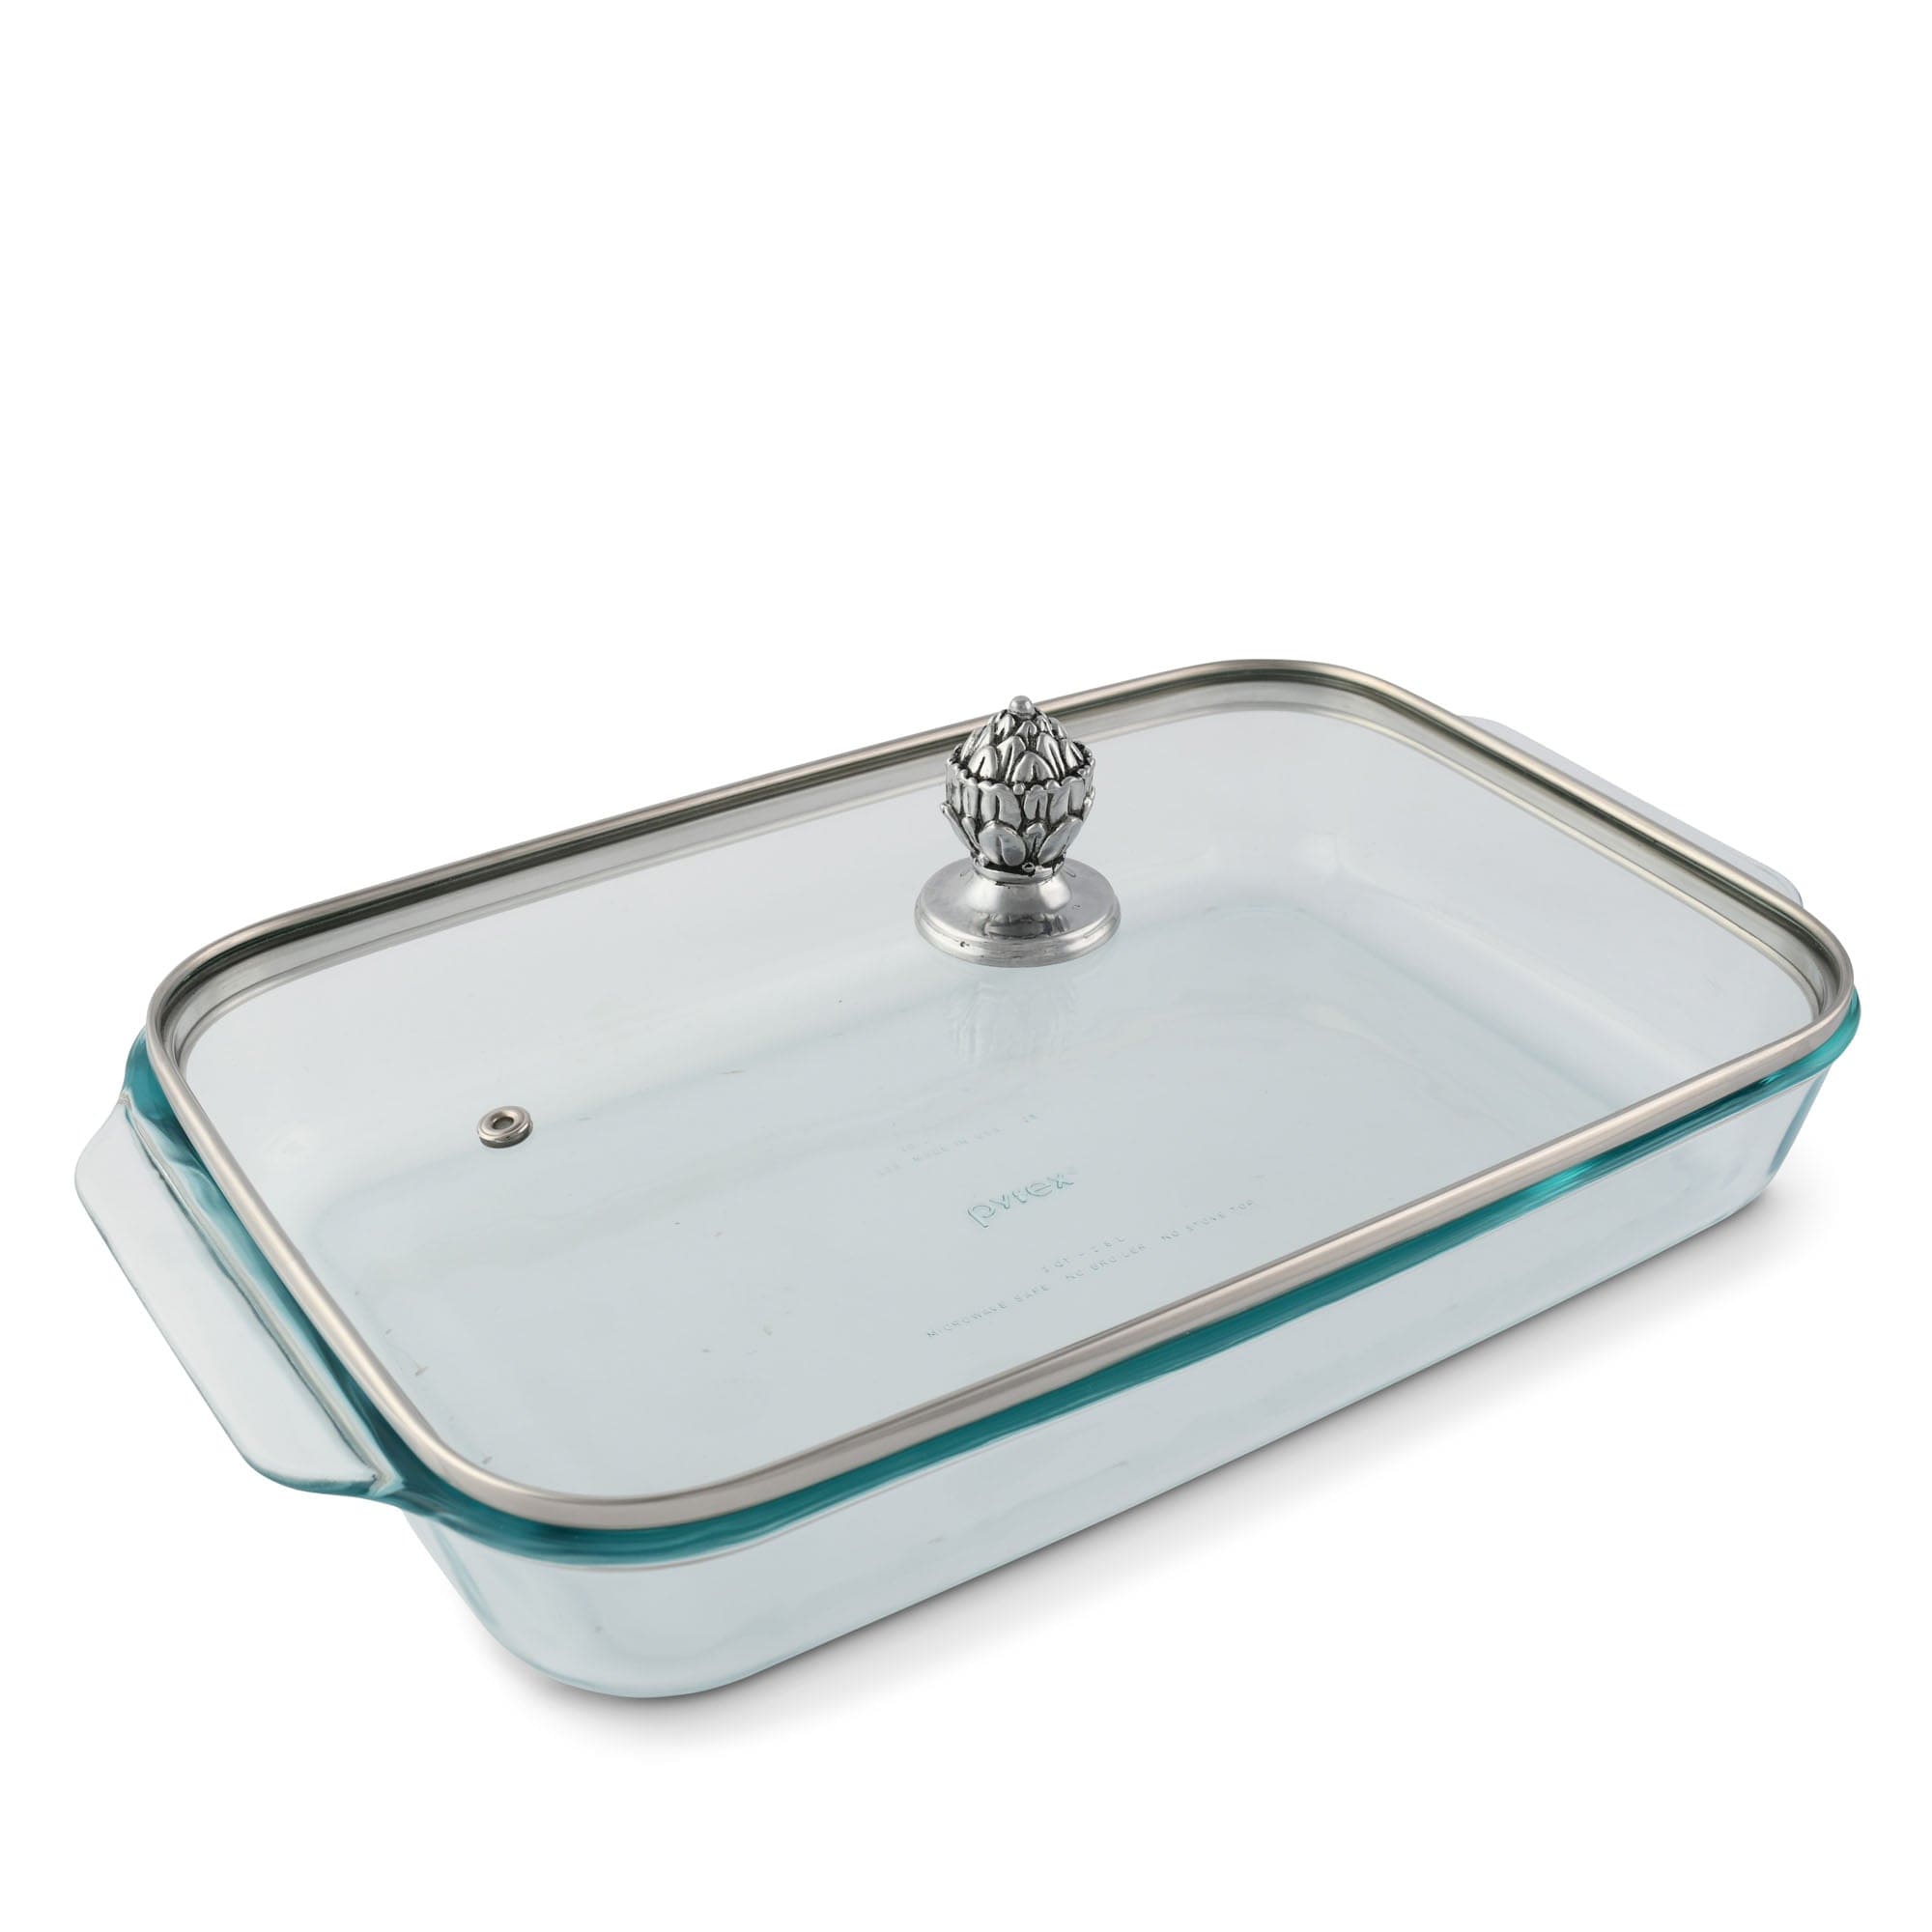 https://cdn.shopify.com/s/files/1/2081/3285/products/arthur-court-western-frontier-classic-lid-with-pyrex-3-quart-baking-dish-812w13-31866362888307_2000x.jpg?v=1678113812